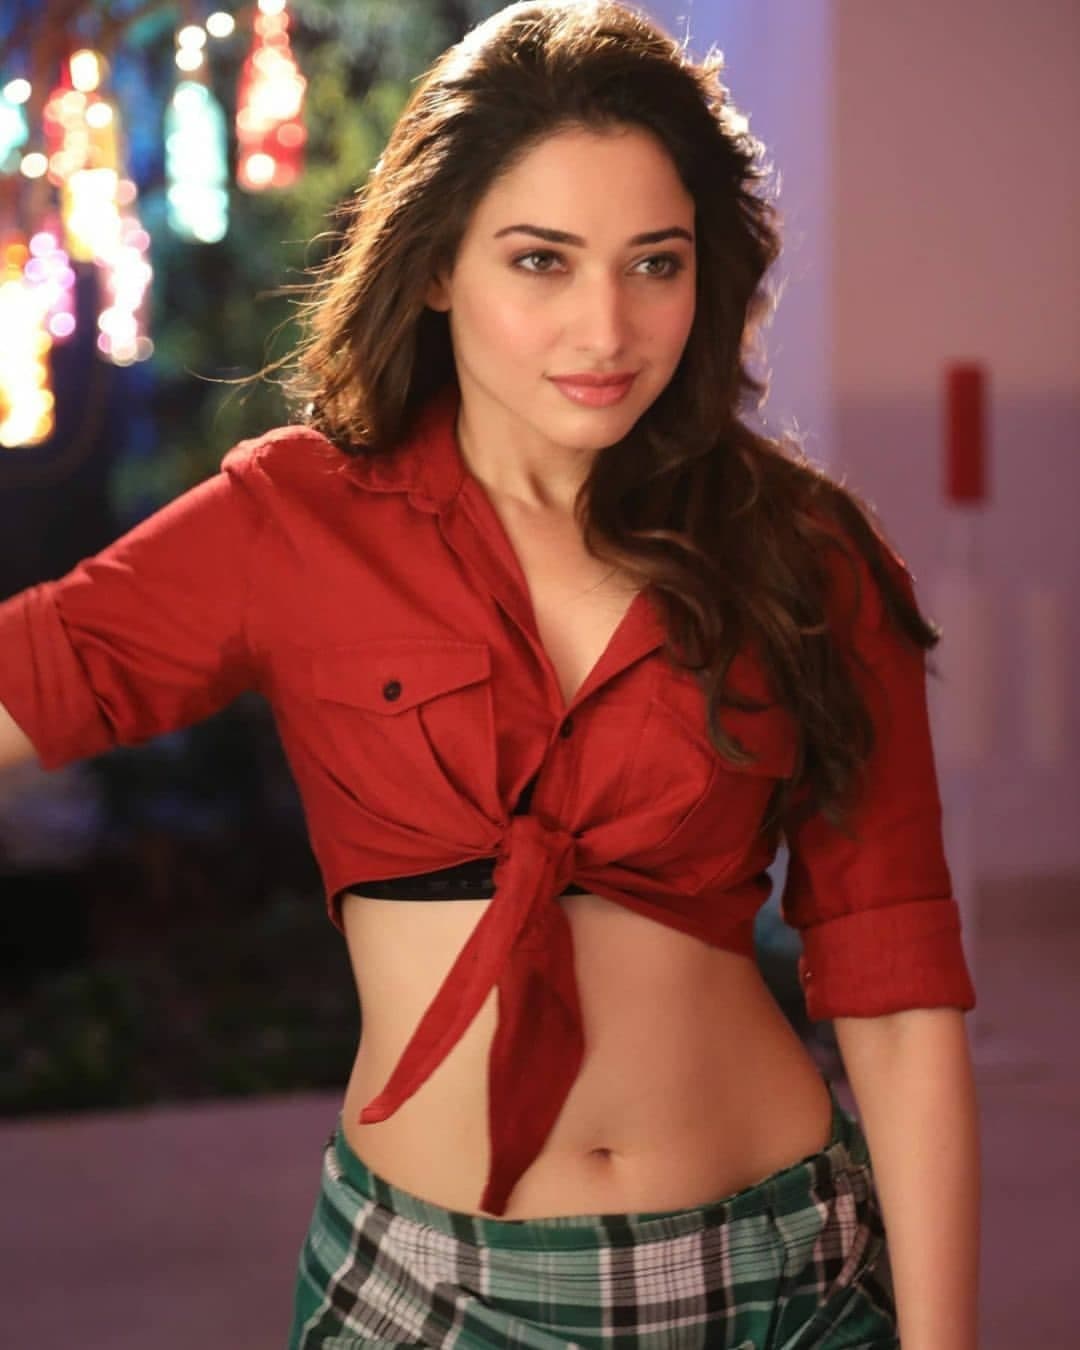 Tamannaah Bhatia Hot and Sexy Pictures - Insta Stars